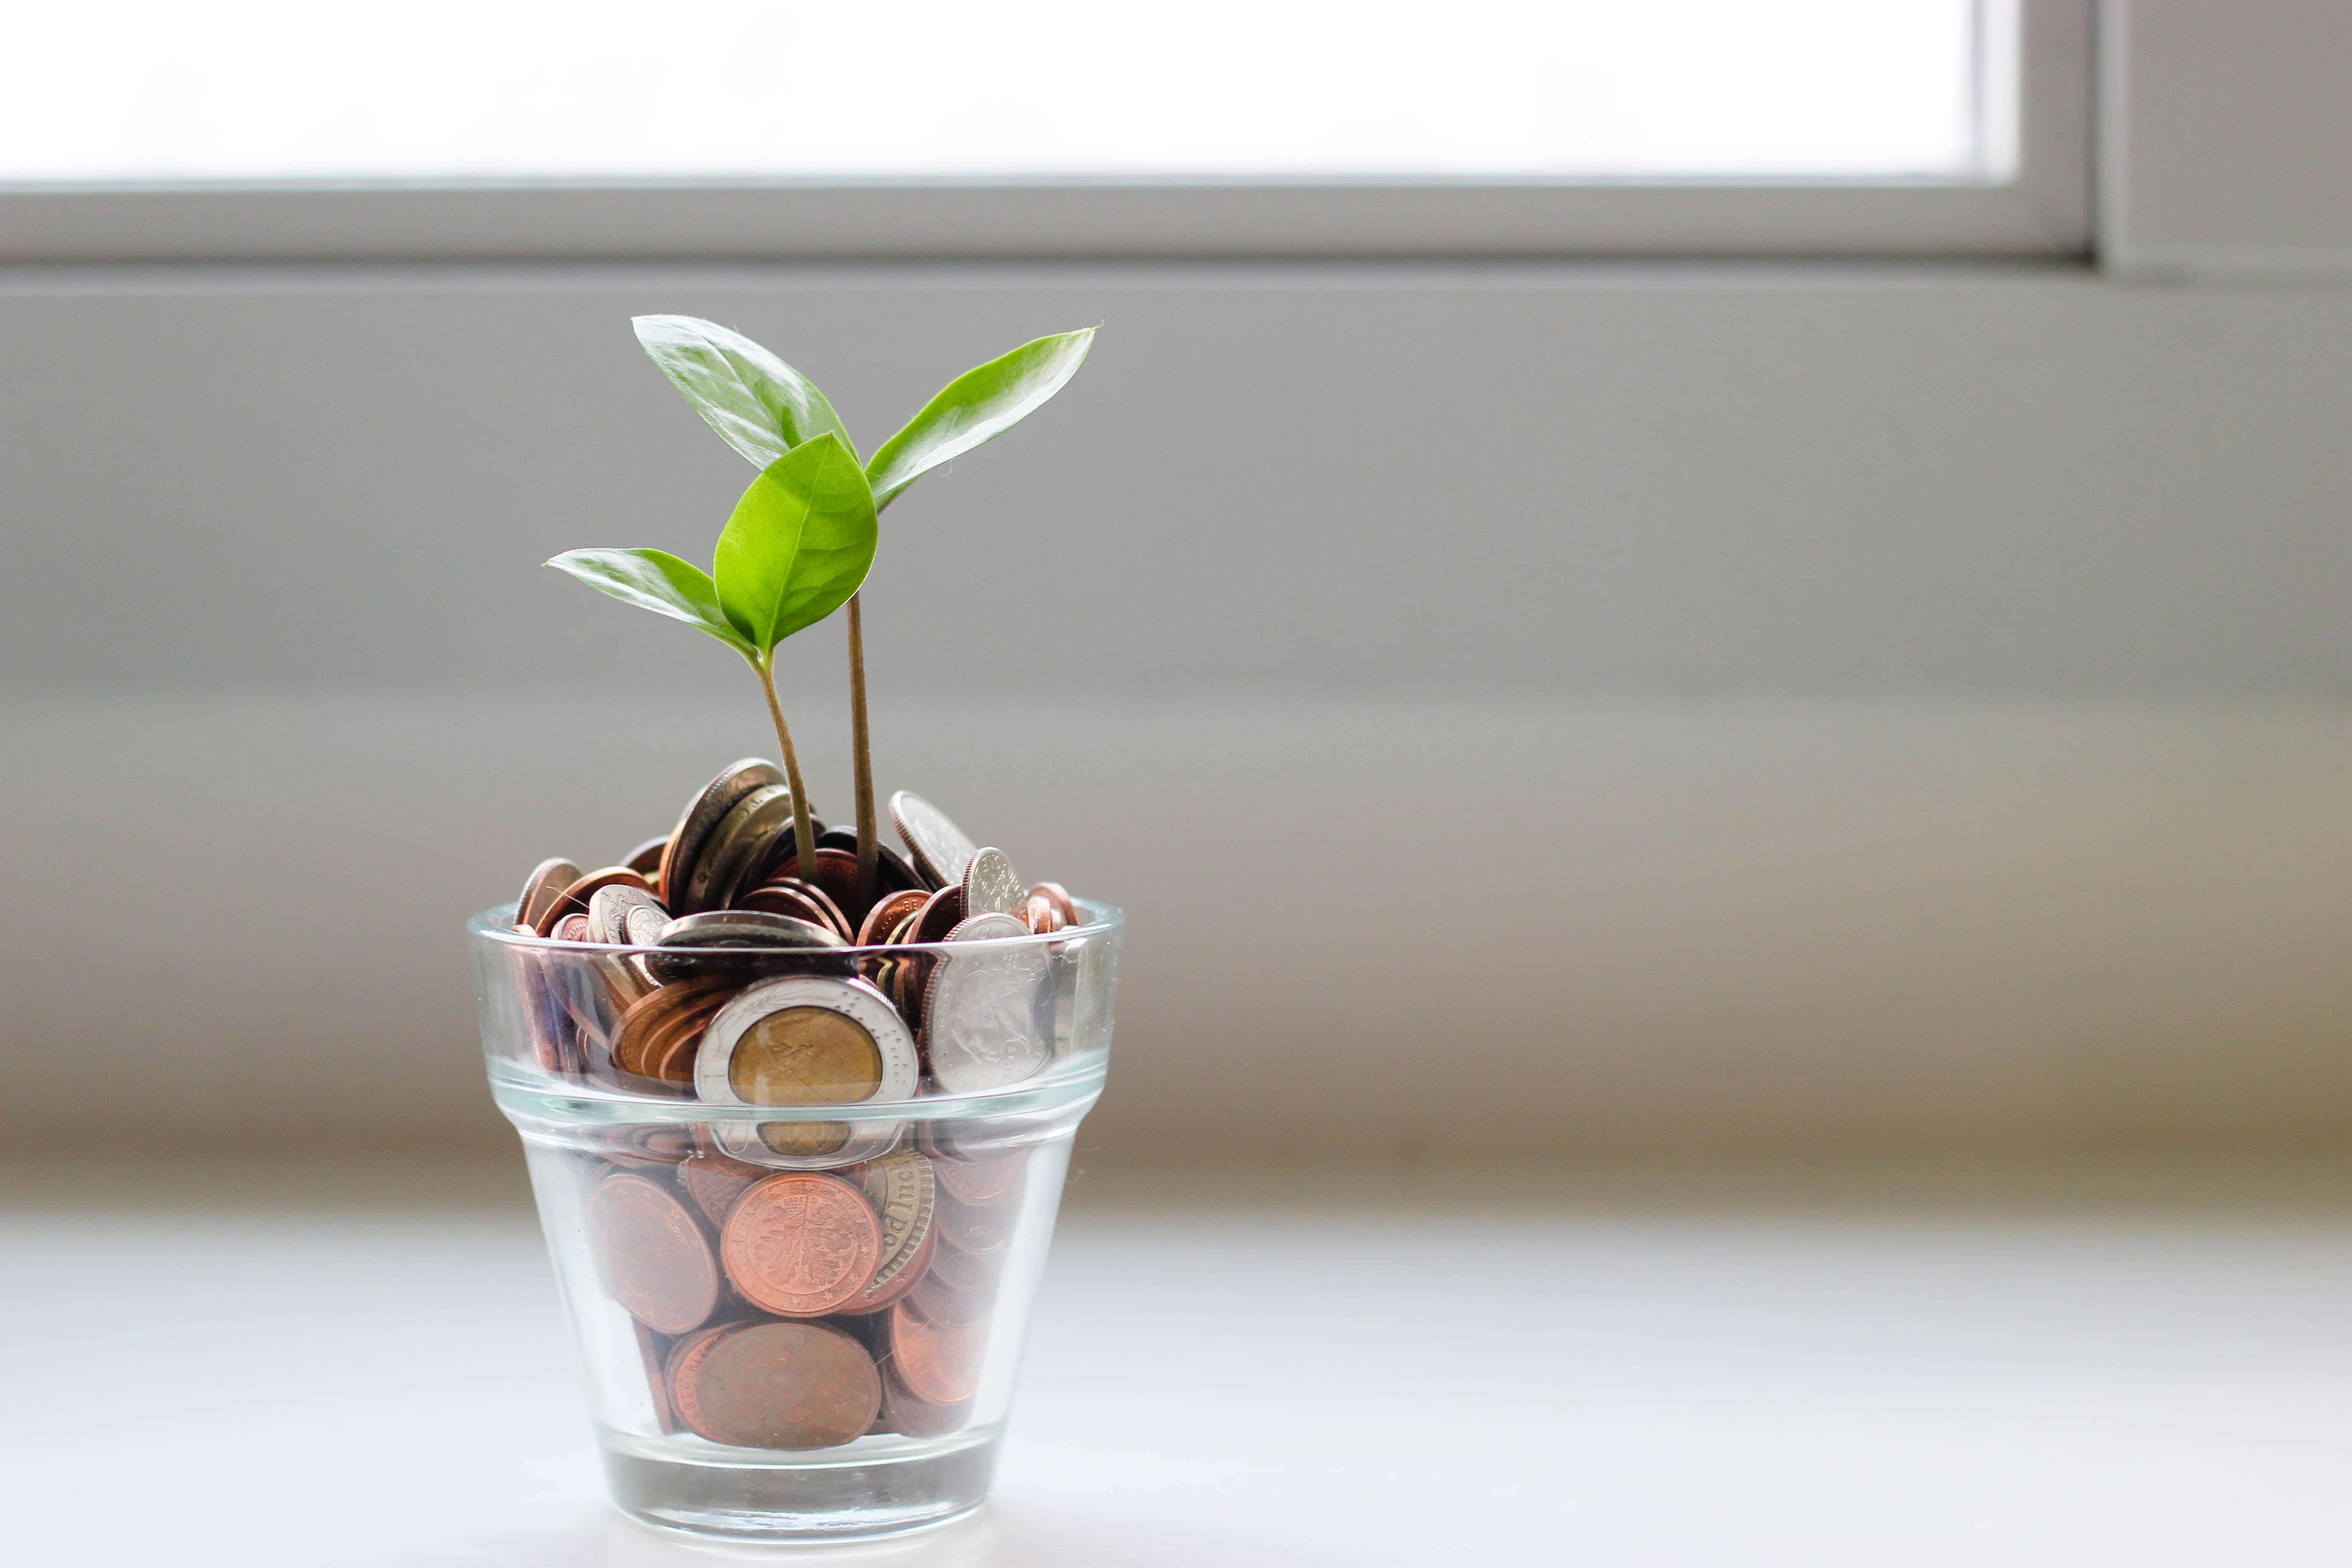 A picture of a plant growing from a plant pot filled with coins.